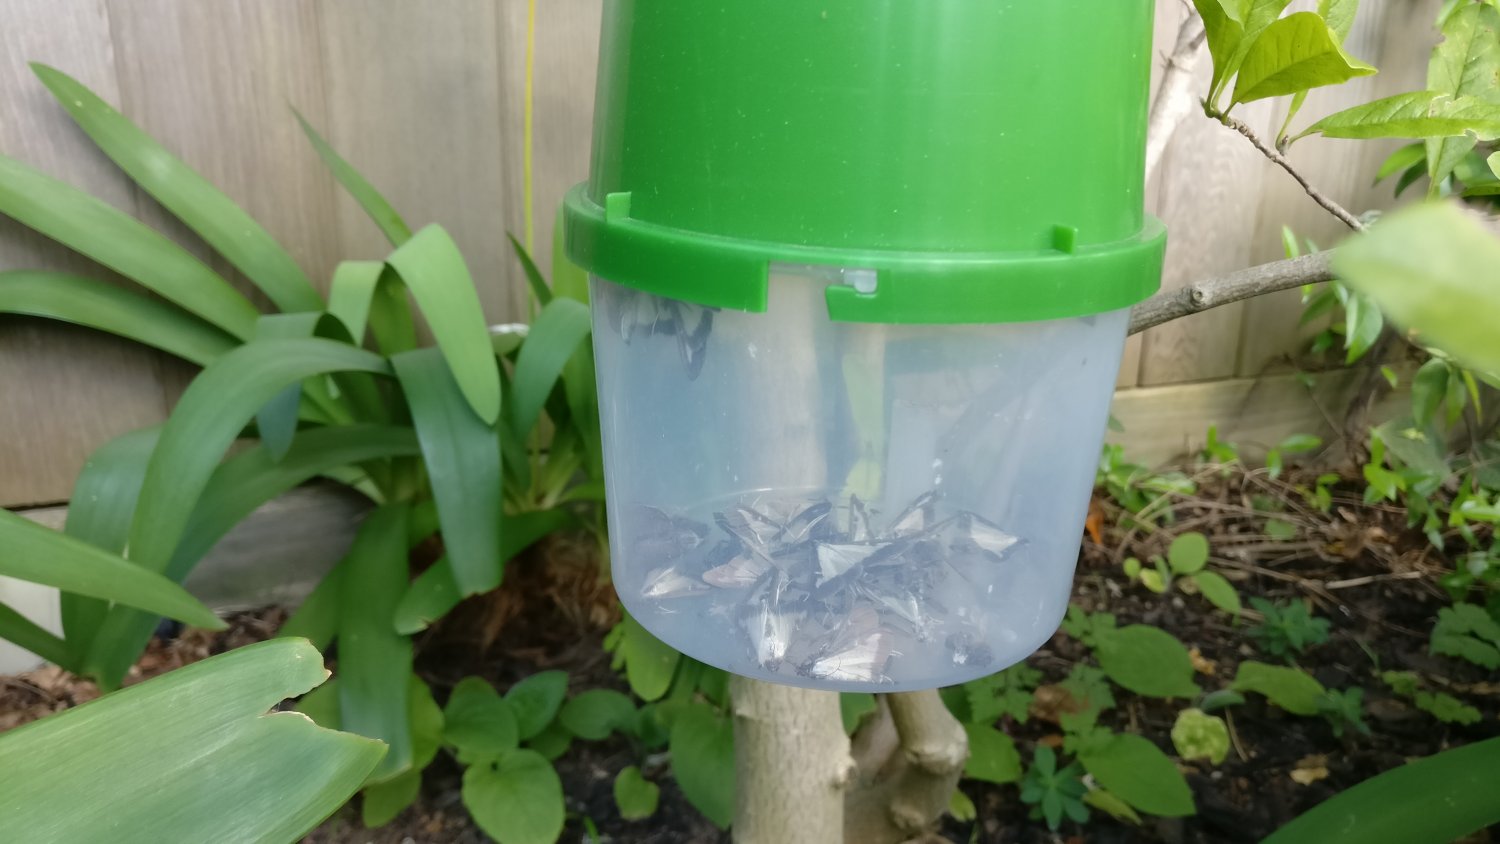 Box Tree Moths ‘plague’ – What to do – (Updated 26/04/18)